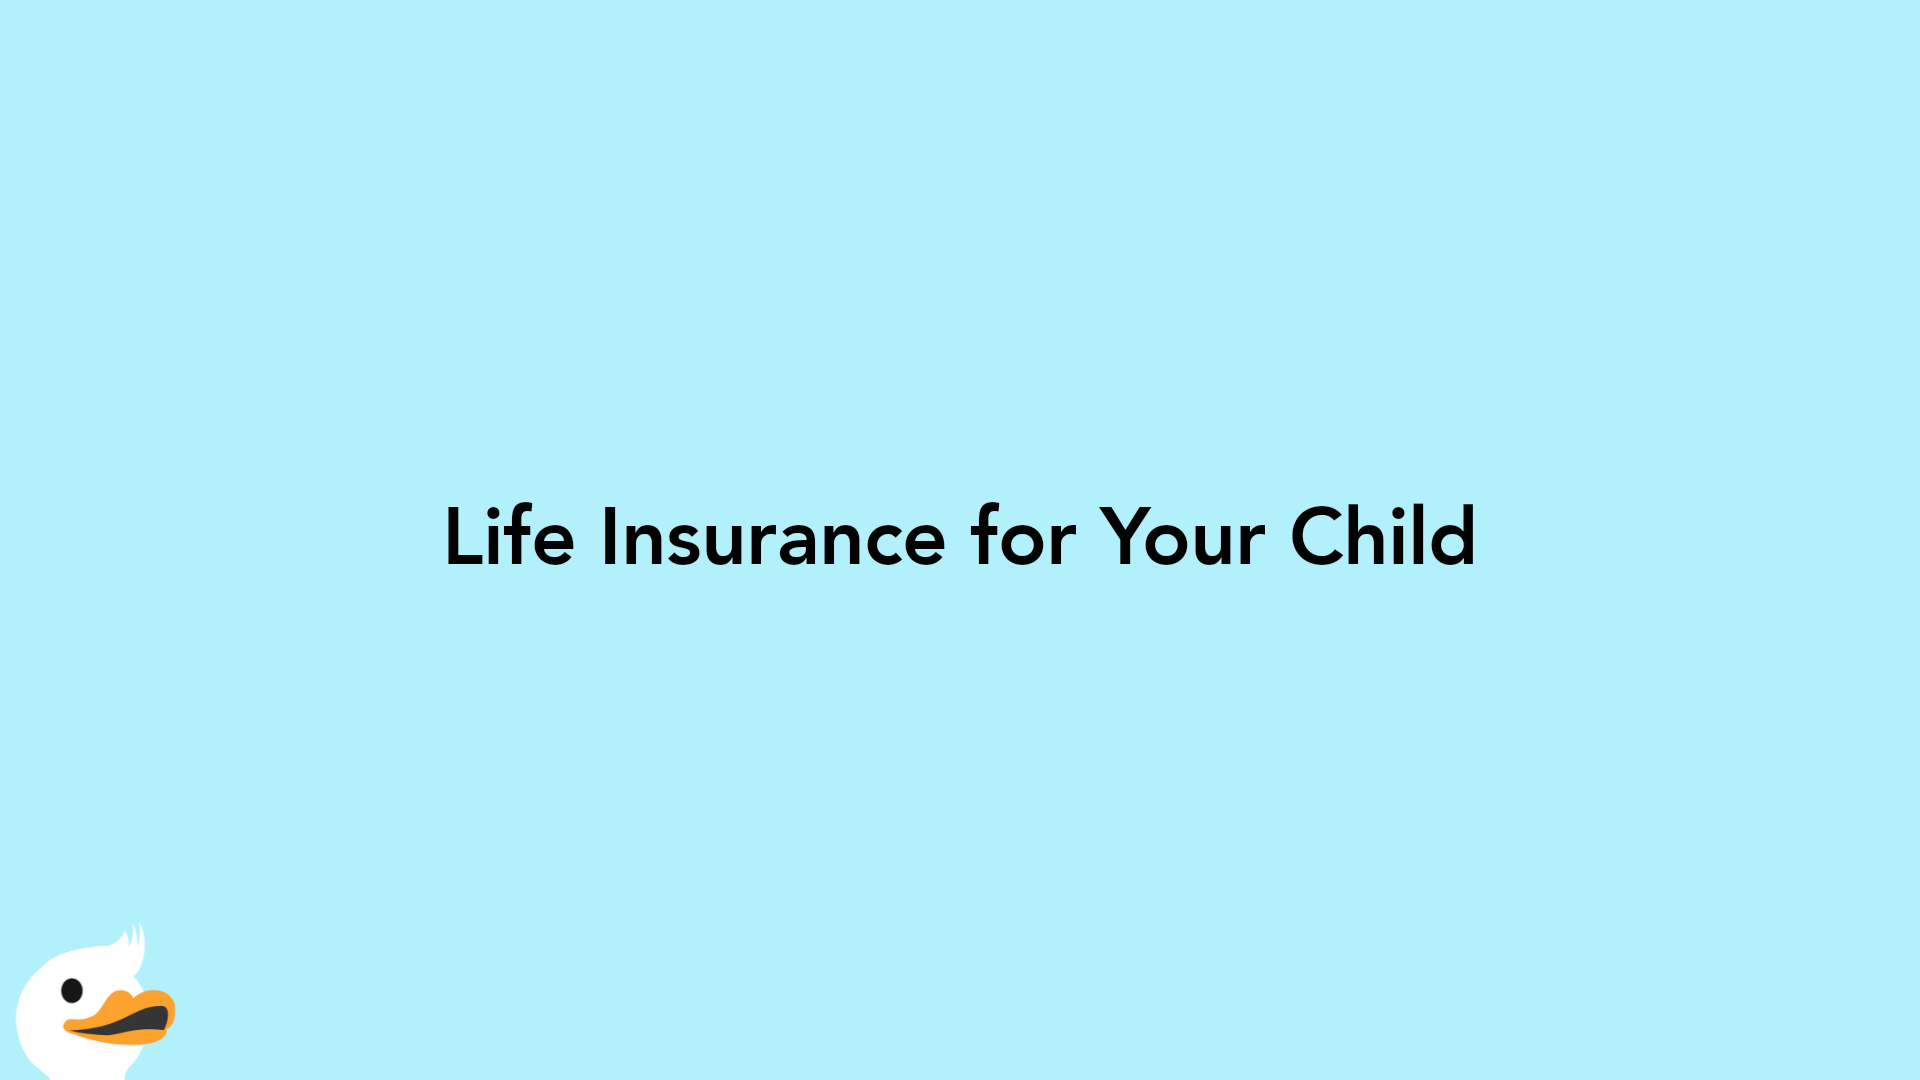 Life Insurance for Your Child